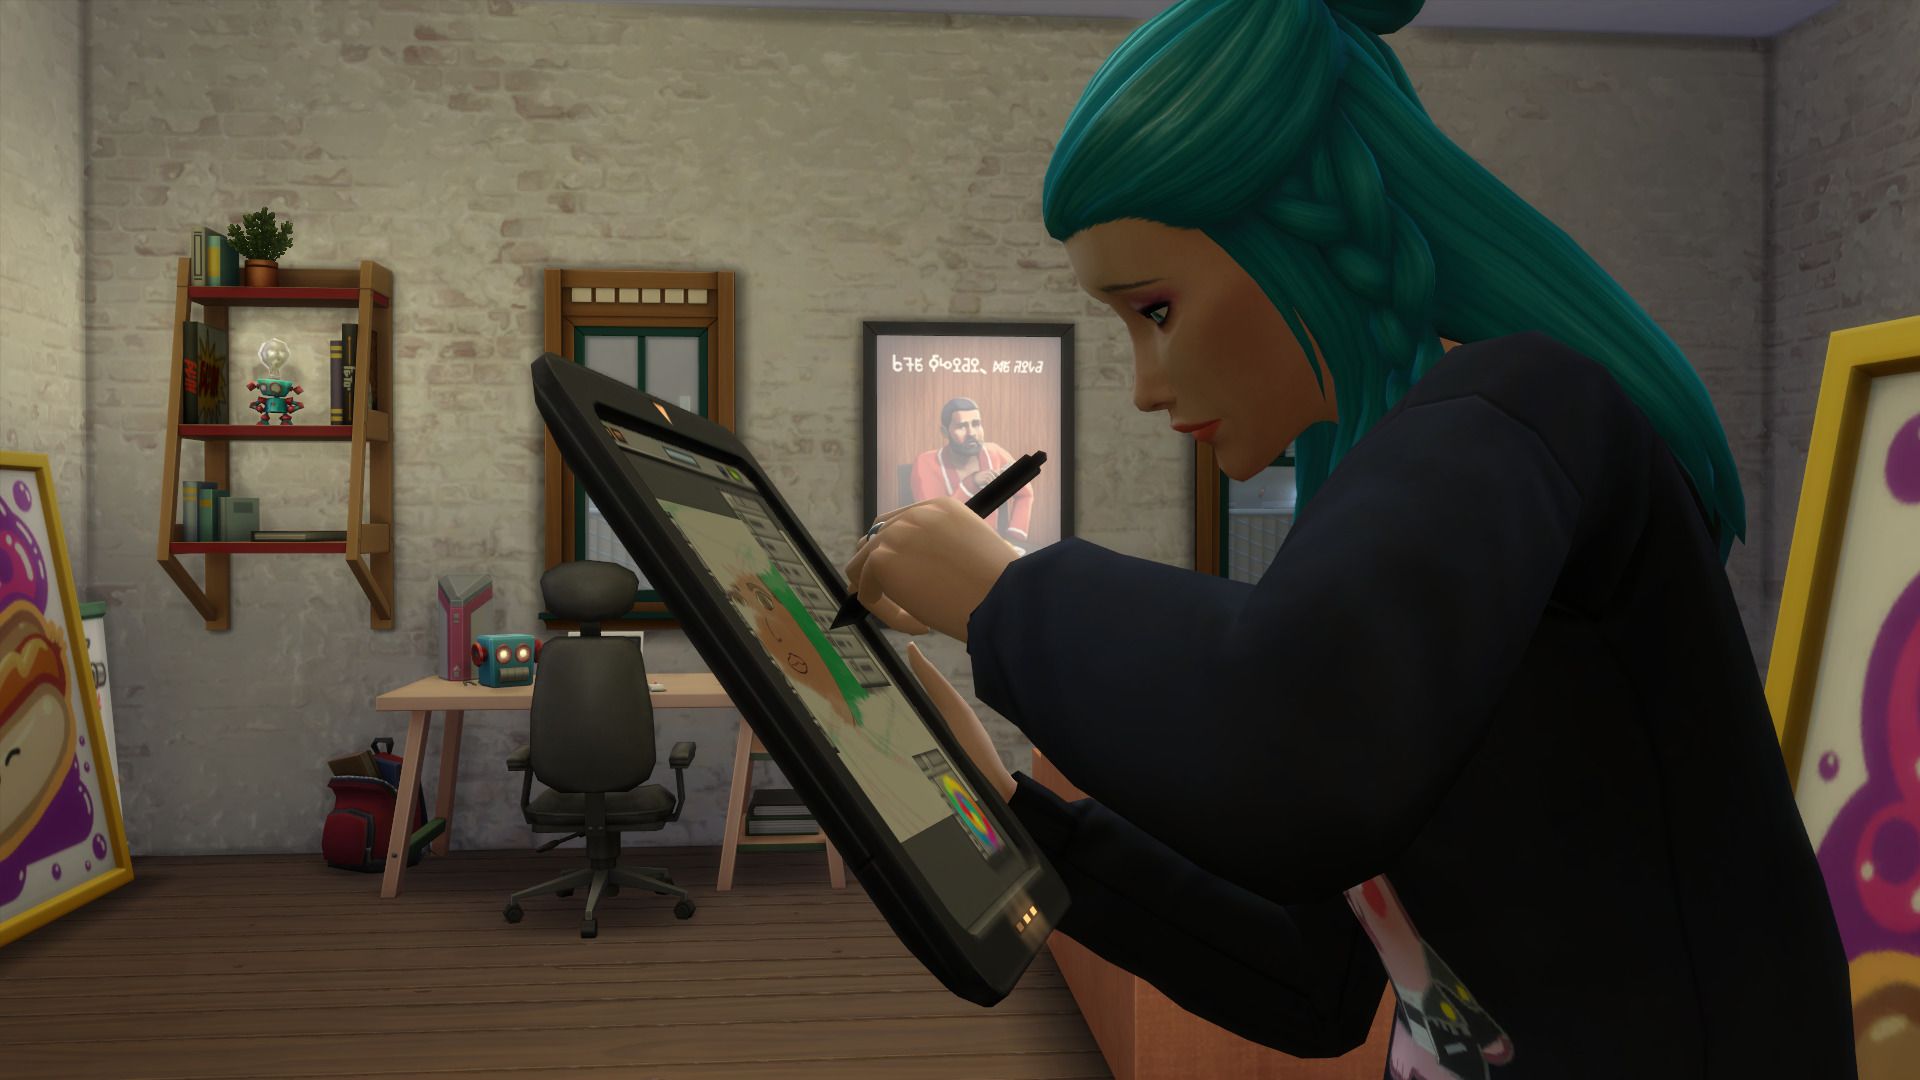 The Sims 4: How to Earn Simoleons Fast (Without Cheats)